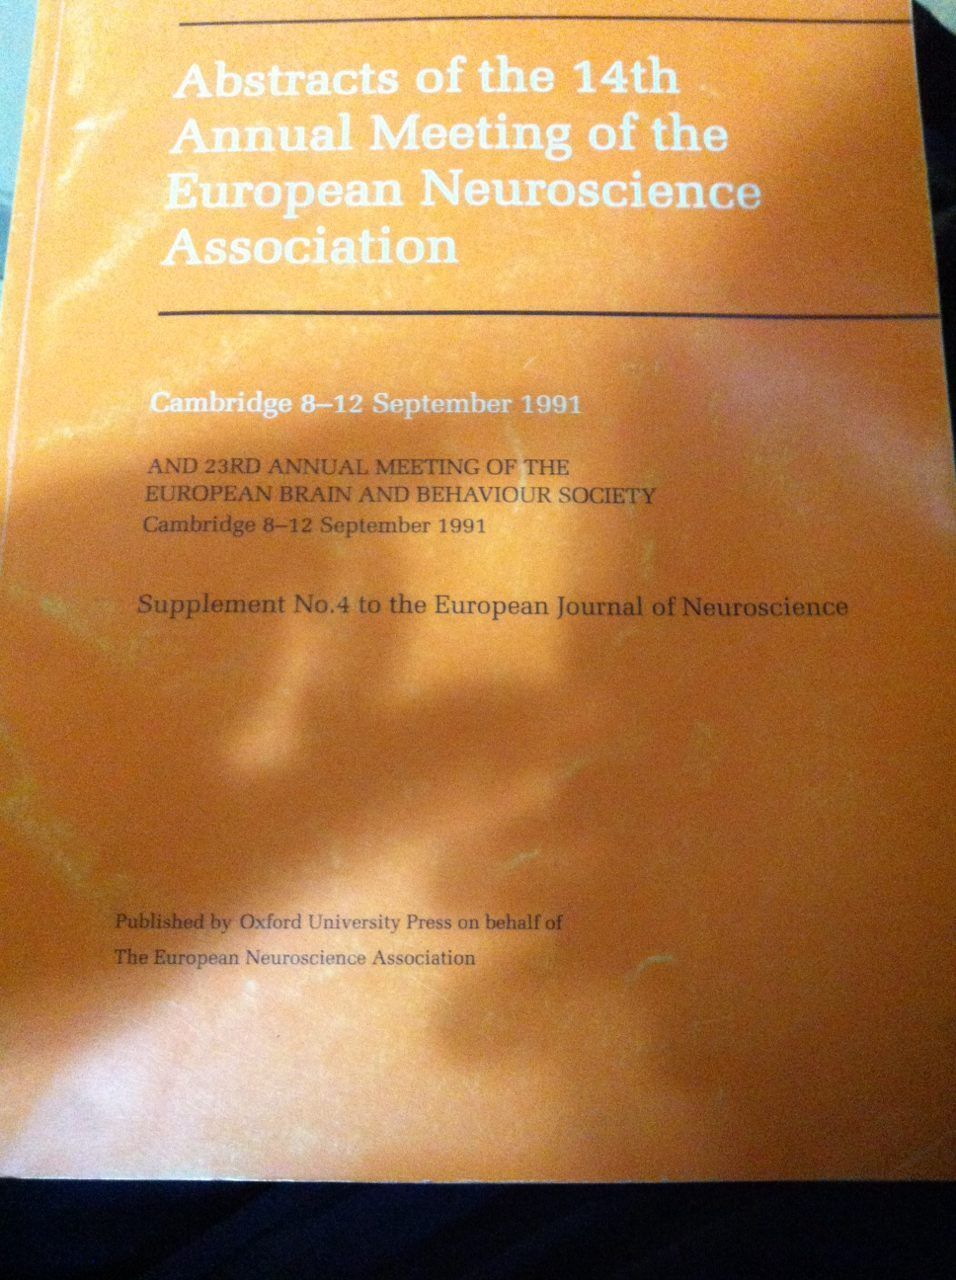 Abstract of the 14th annual meeting of the European neuroscience association-lo